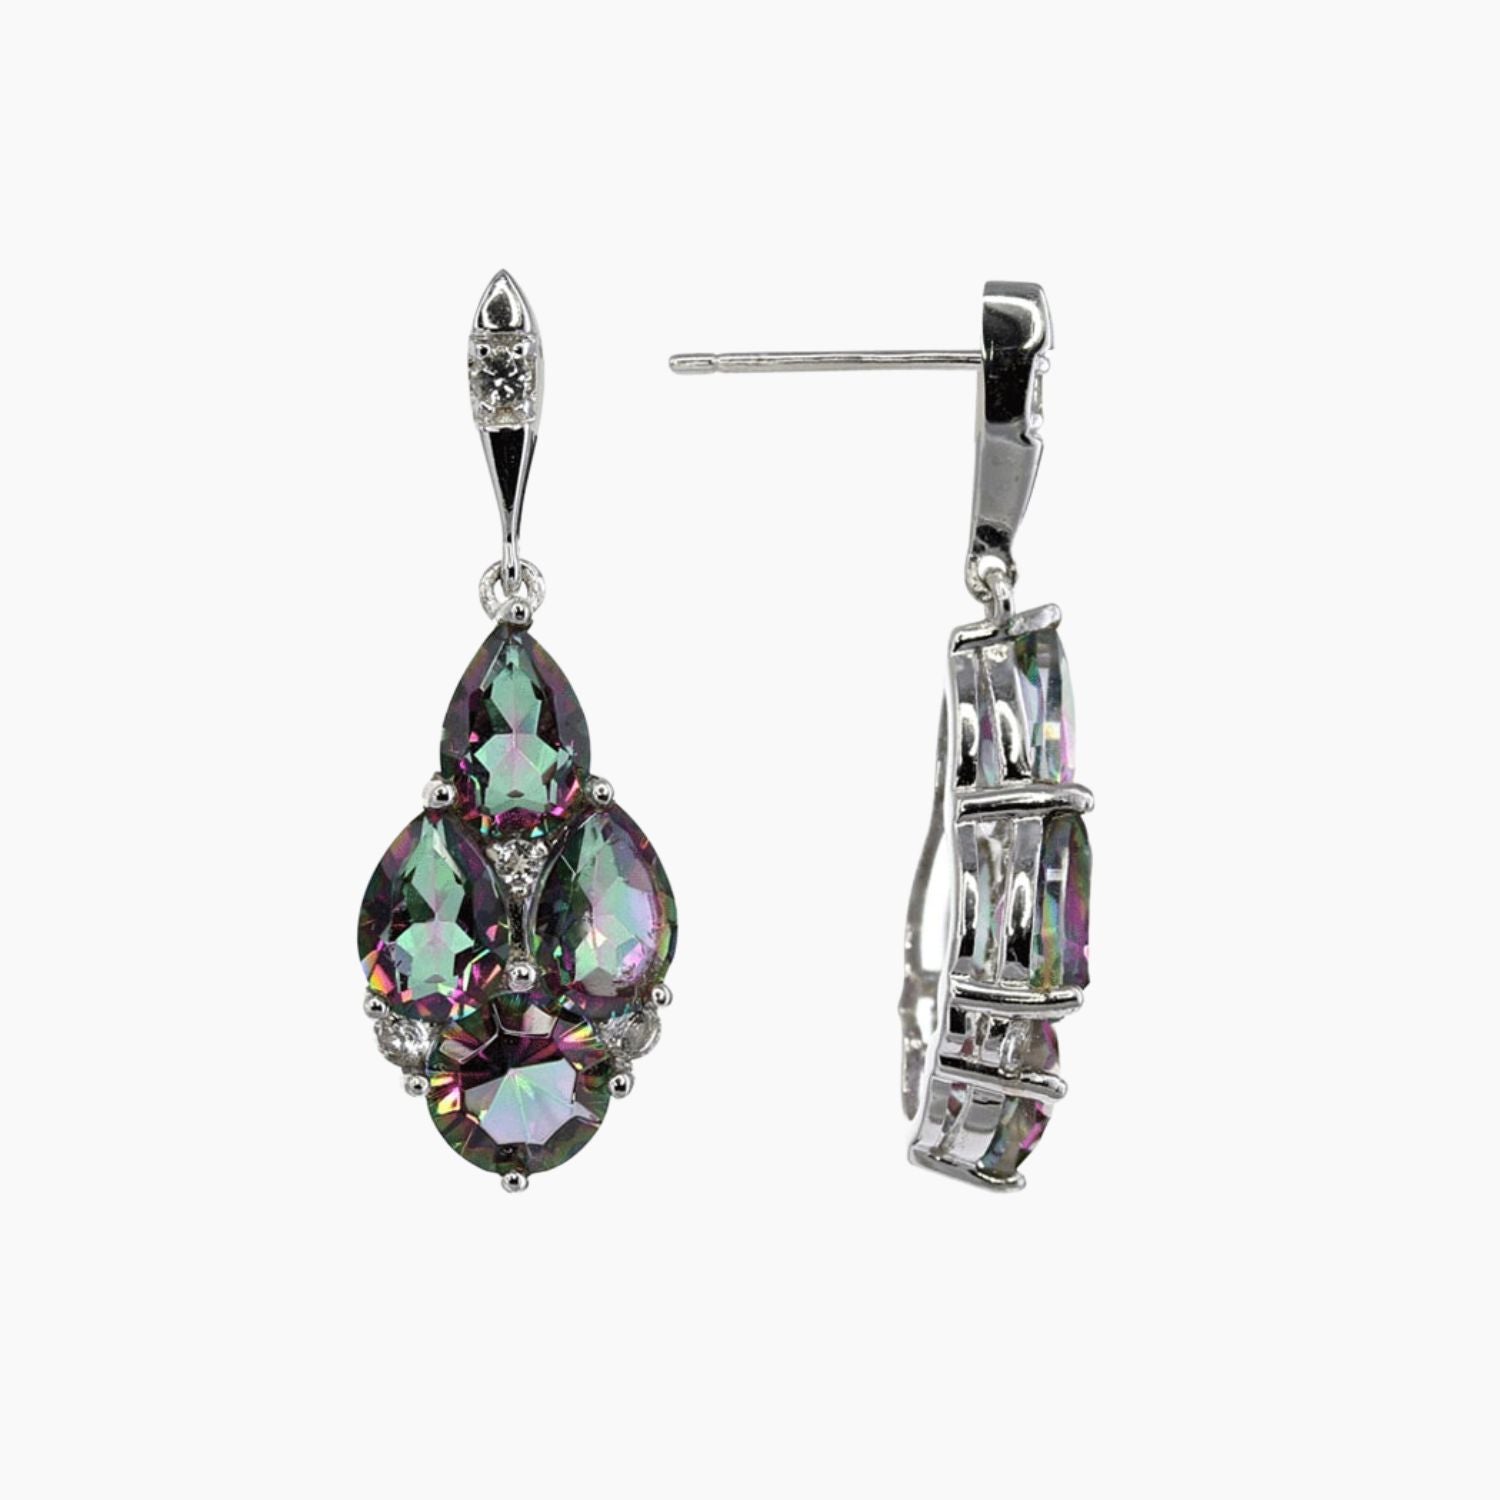 Mystic Quartz Cluster Earrings In Sterling Silver With White Topaz